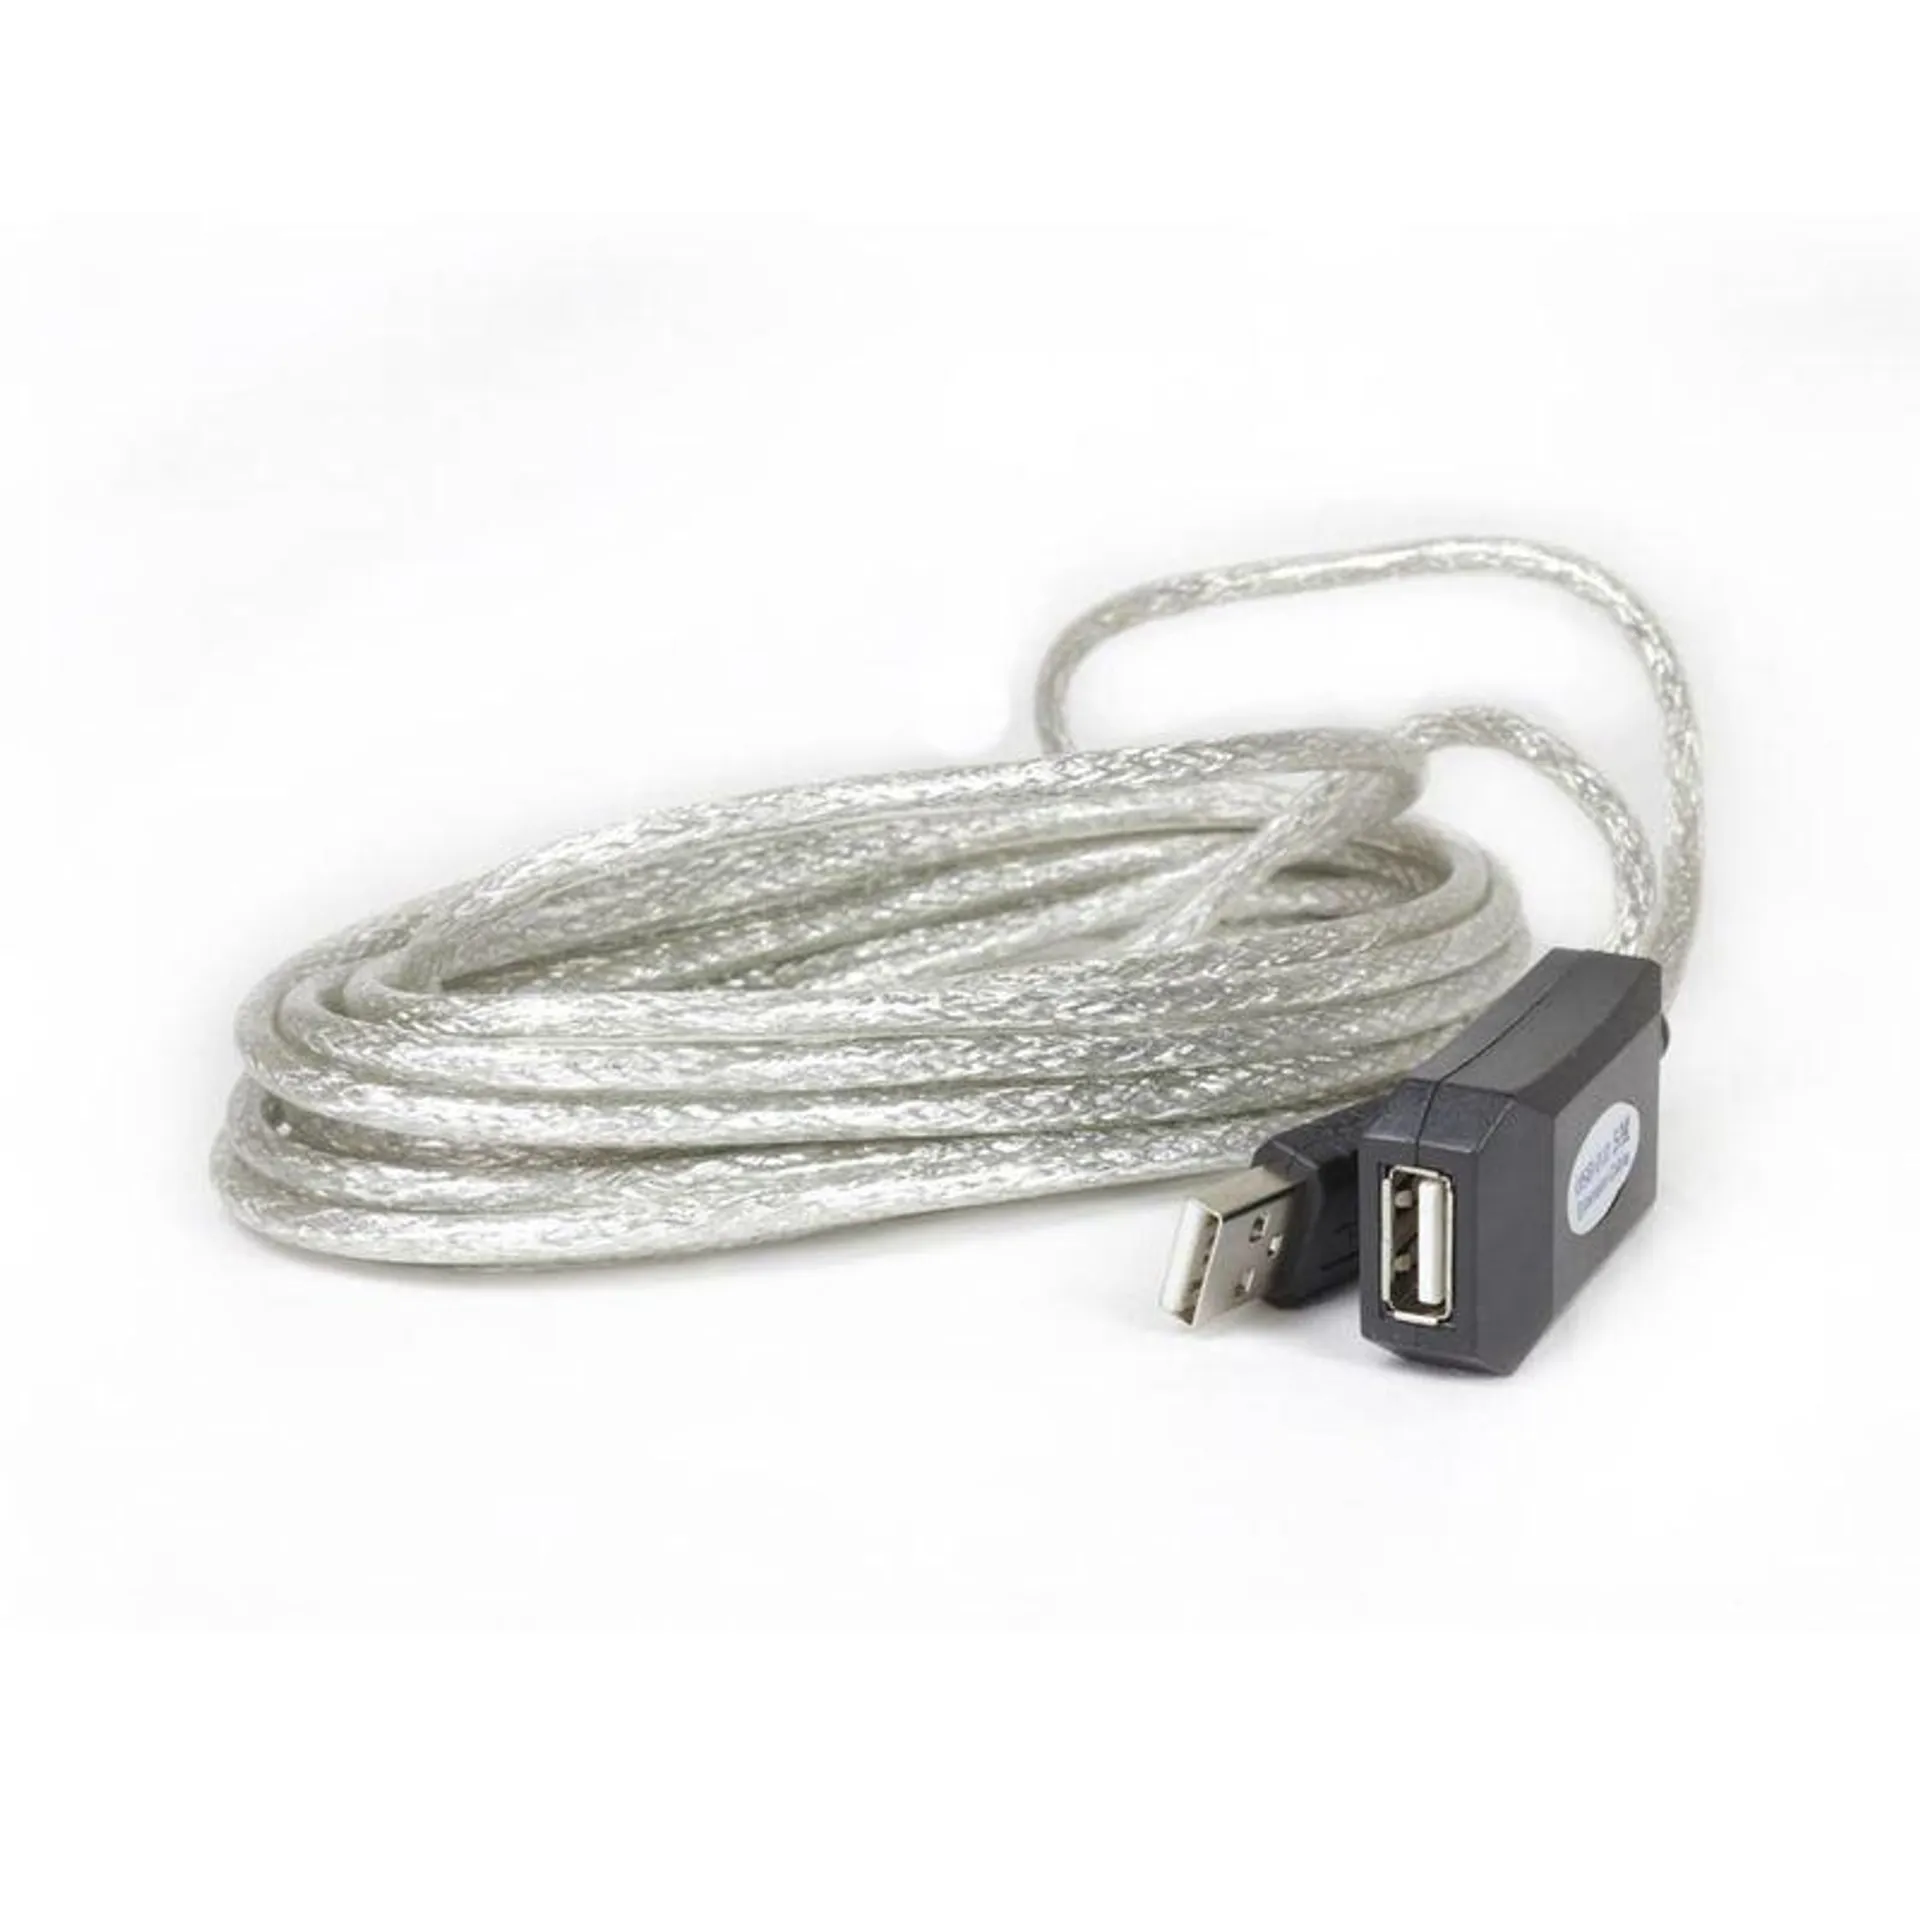 CABLE EXTENSION USB 5M AMPLIFICADA